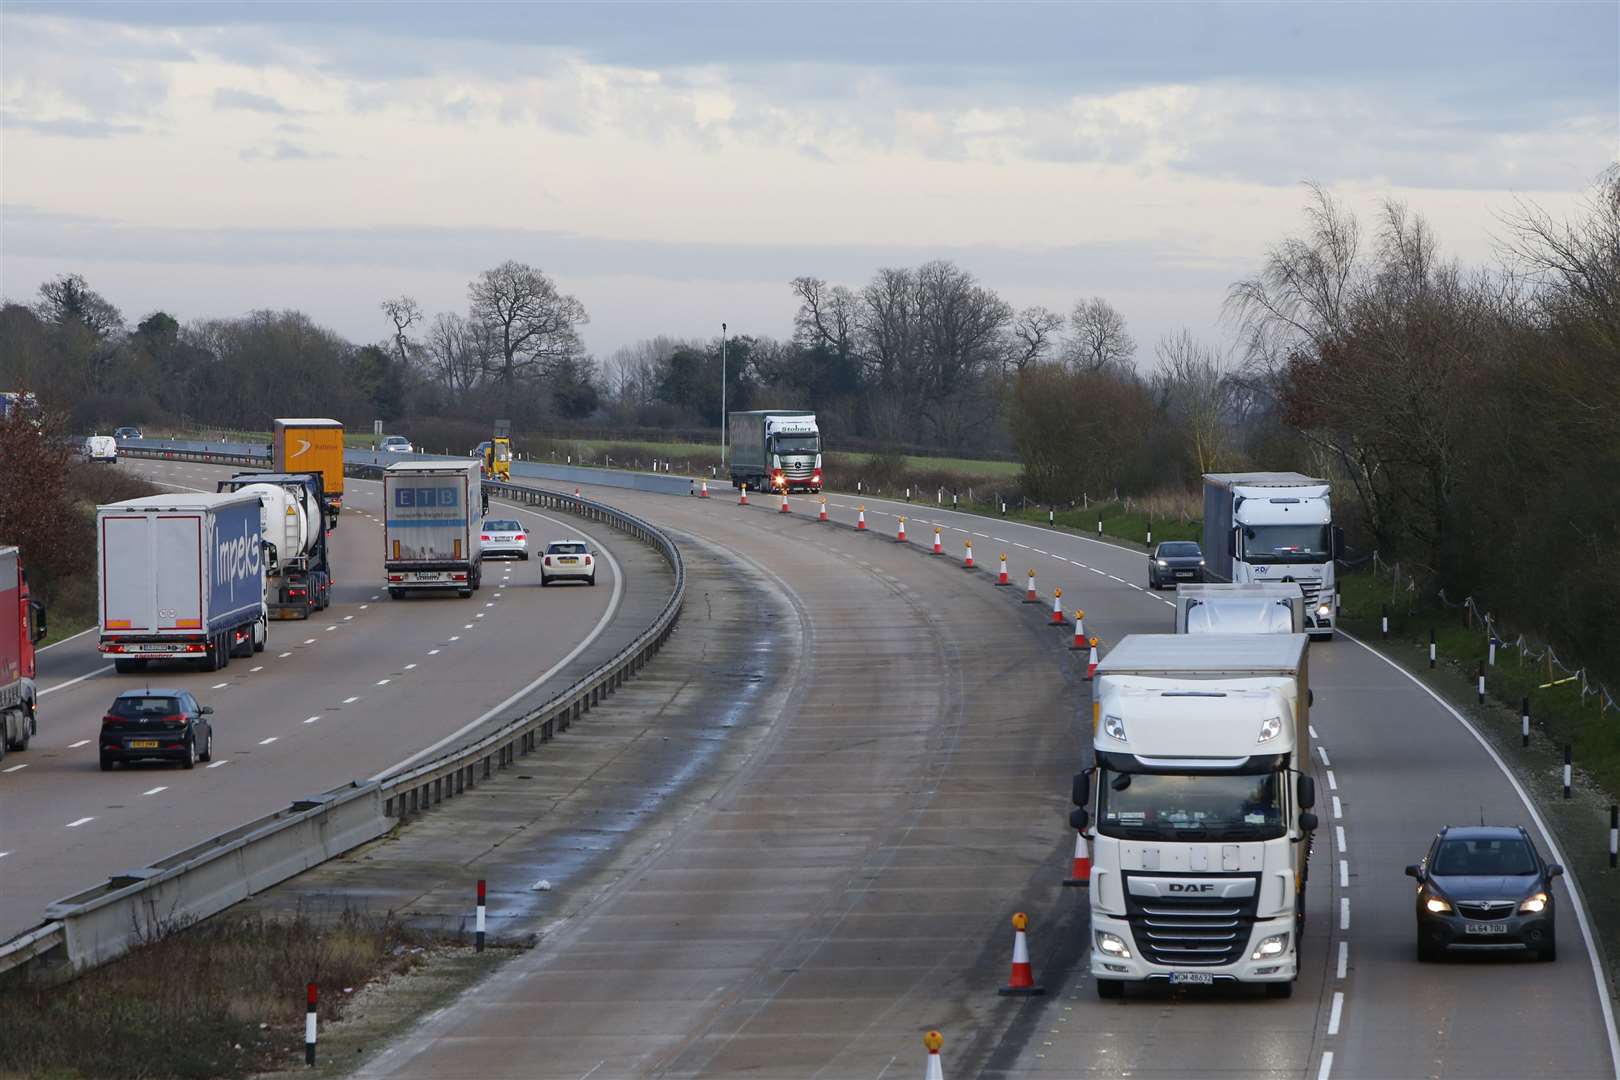 The barrier was removed in January, allowing drivers to return to 70mph